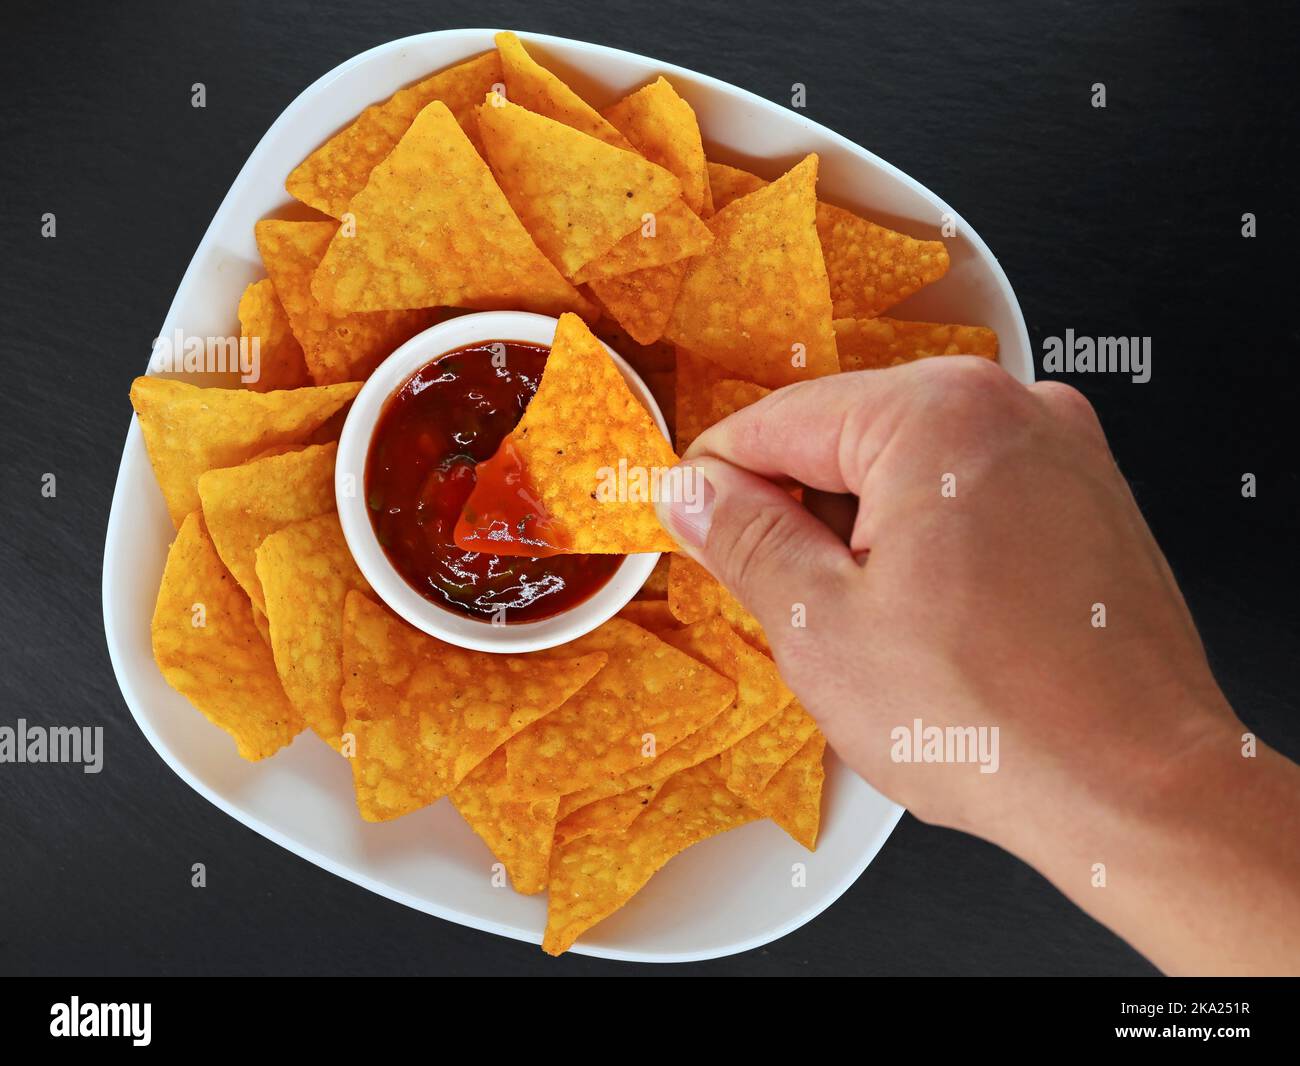 male hand dipping a mexican corn chip or tortilla chip in a spicy salsa dip, top view of a bowl of tortillas with salsa on black slate background Stock Photo